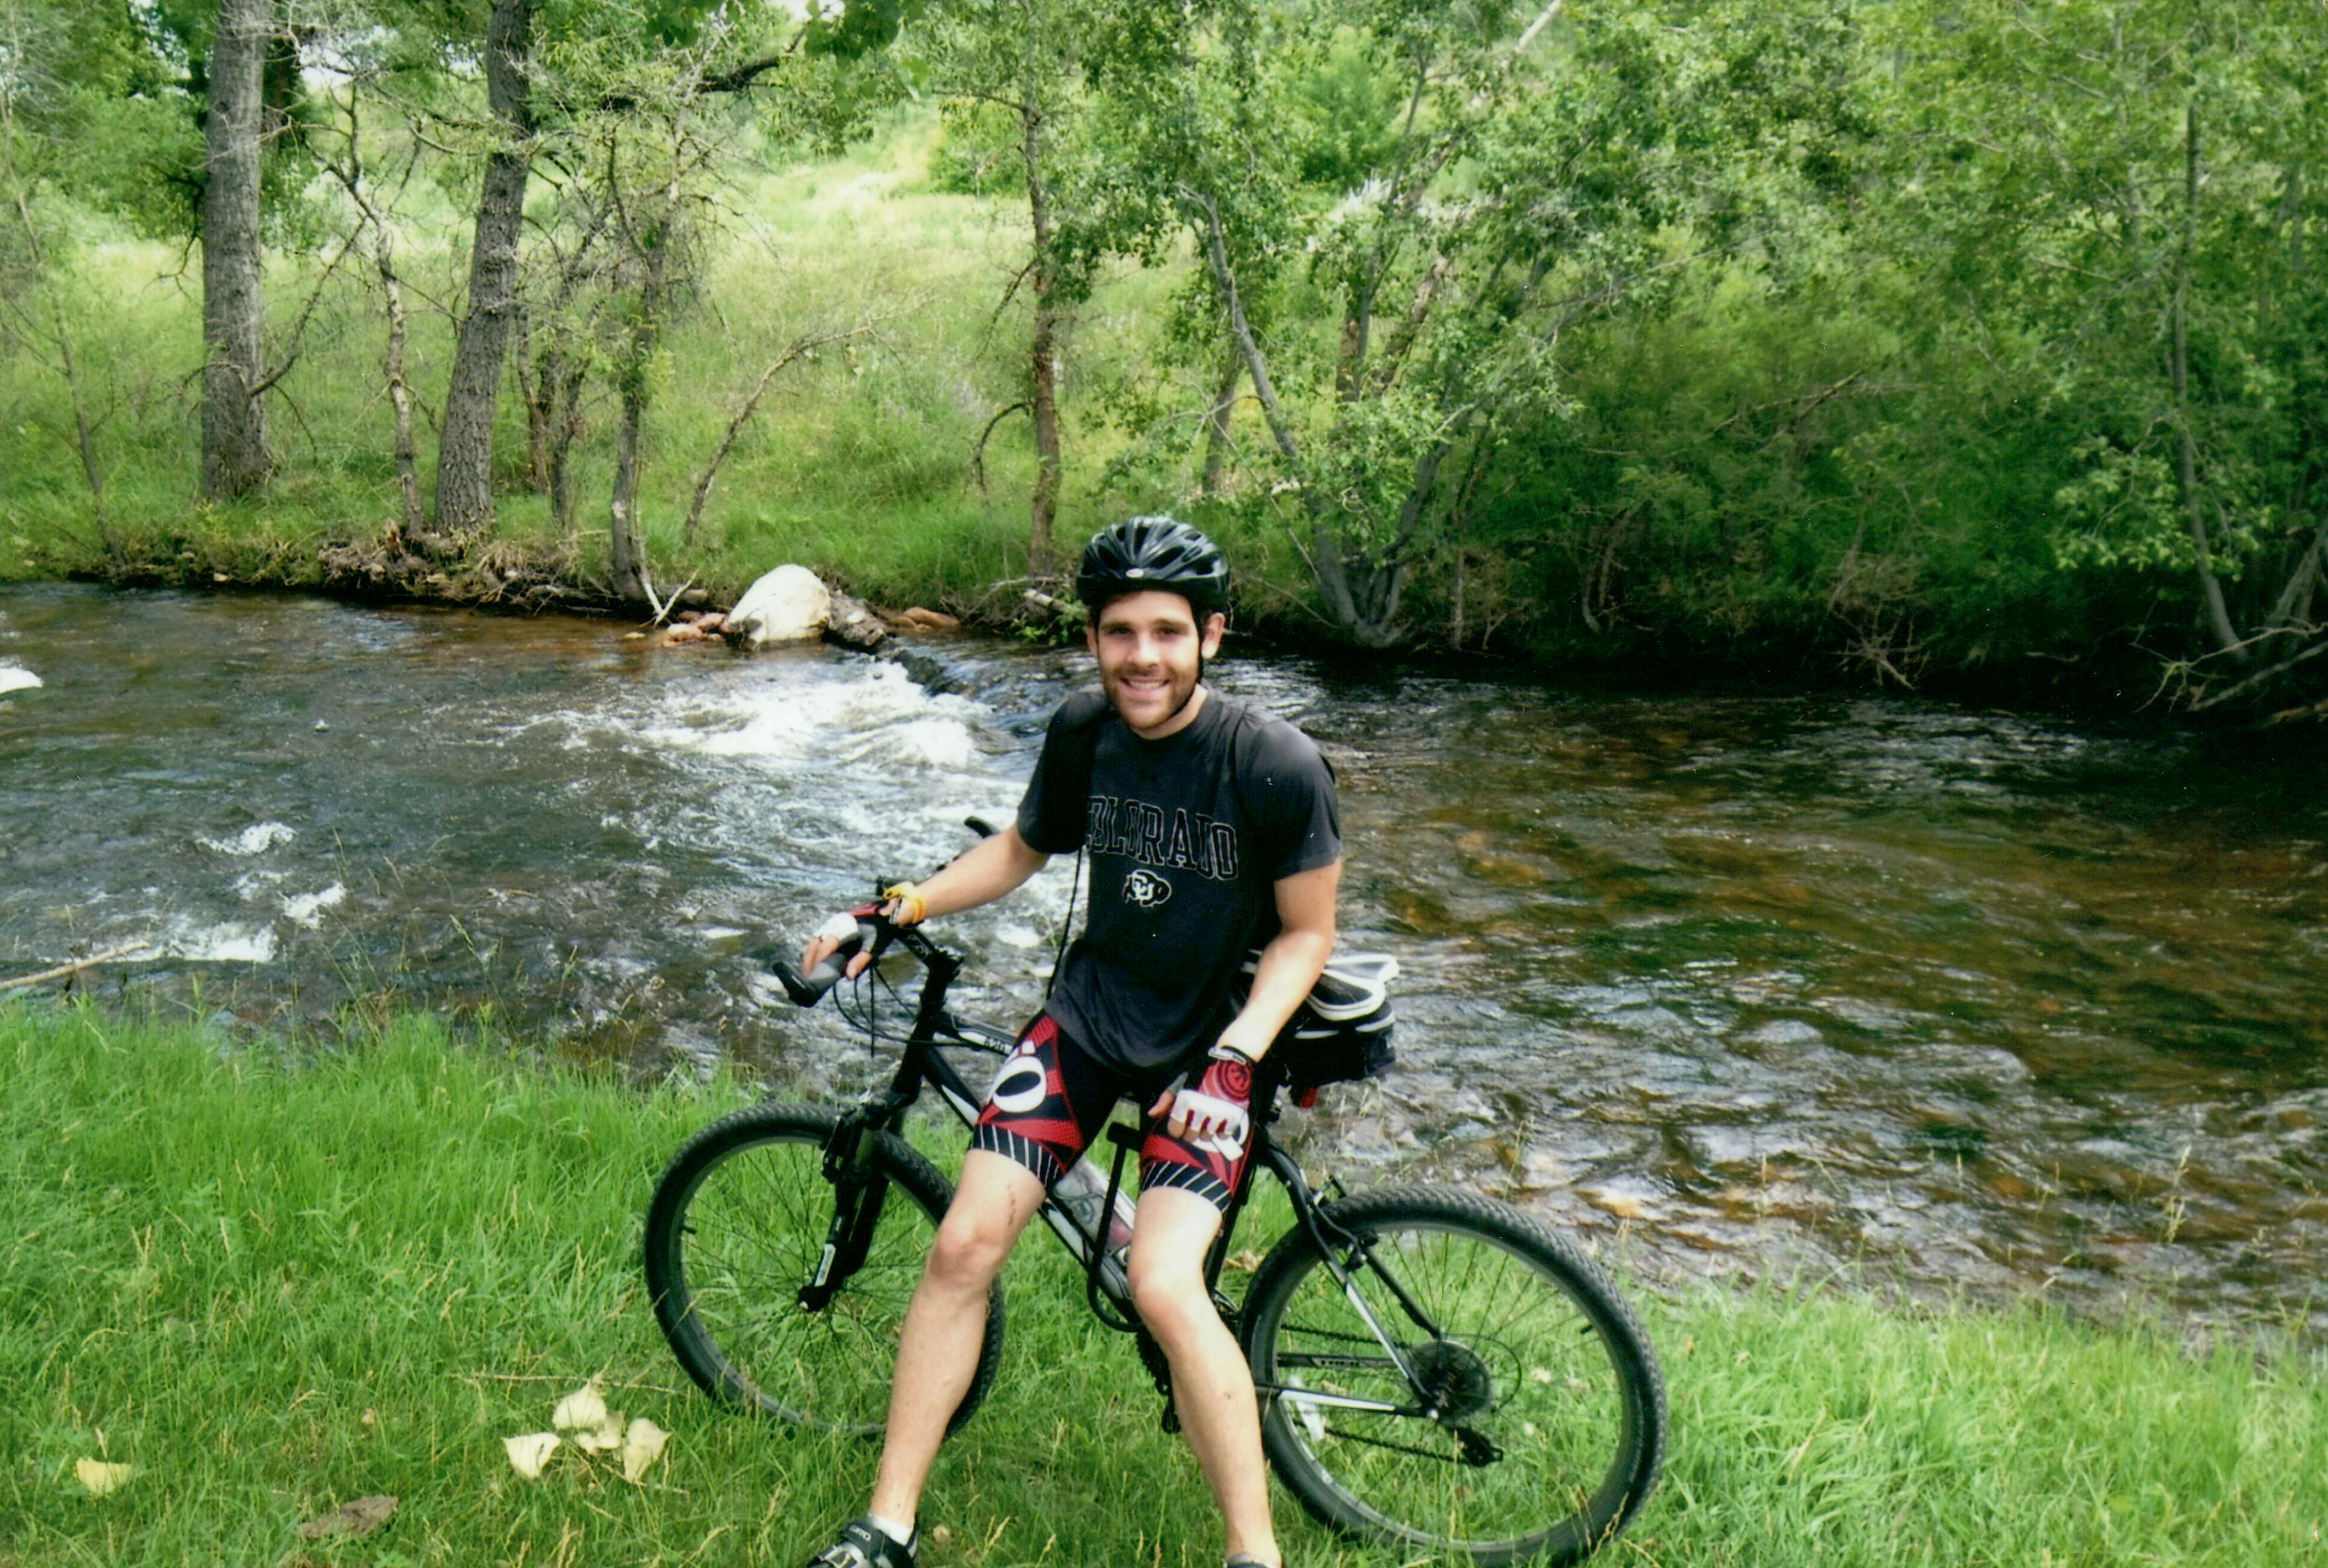 Joseph Emerson with a beard, wearing a black T-shirt, cycling shorts, and a bicycle helmet, stands straddling a mountain bike beside a flowing river. The river is surrounded by lush greenery and trees, with some rocks visible in the water.